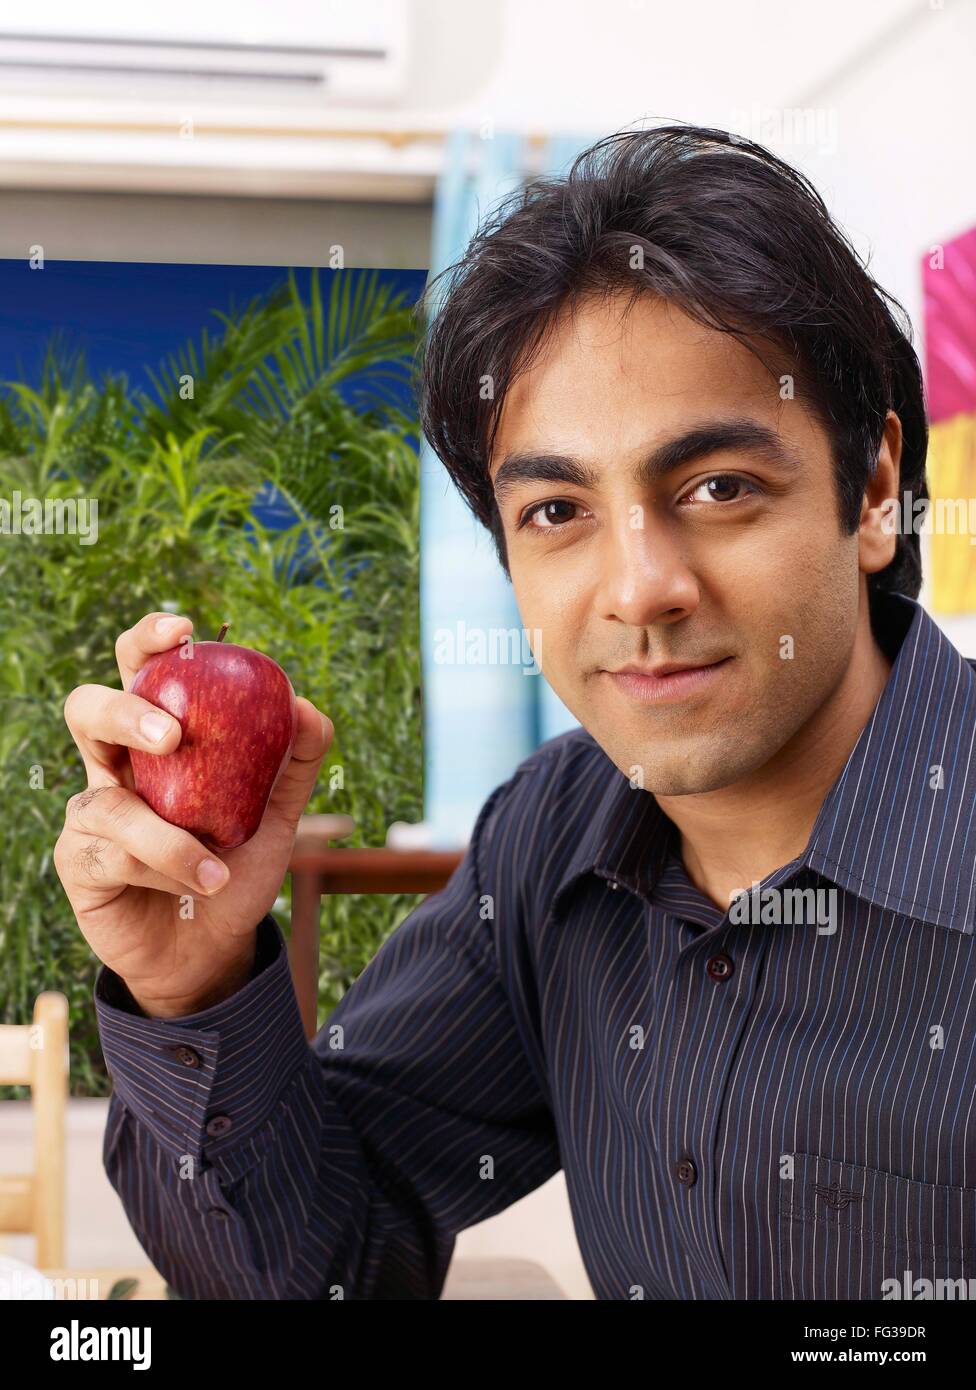 Young man showing red apple in hand MR#702V Stock Photo